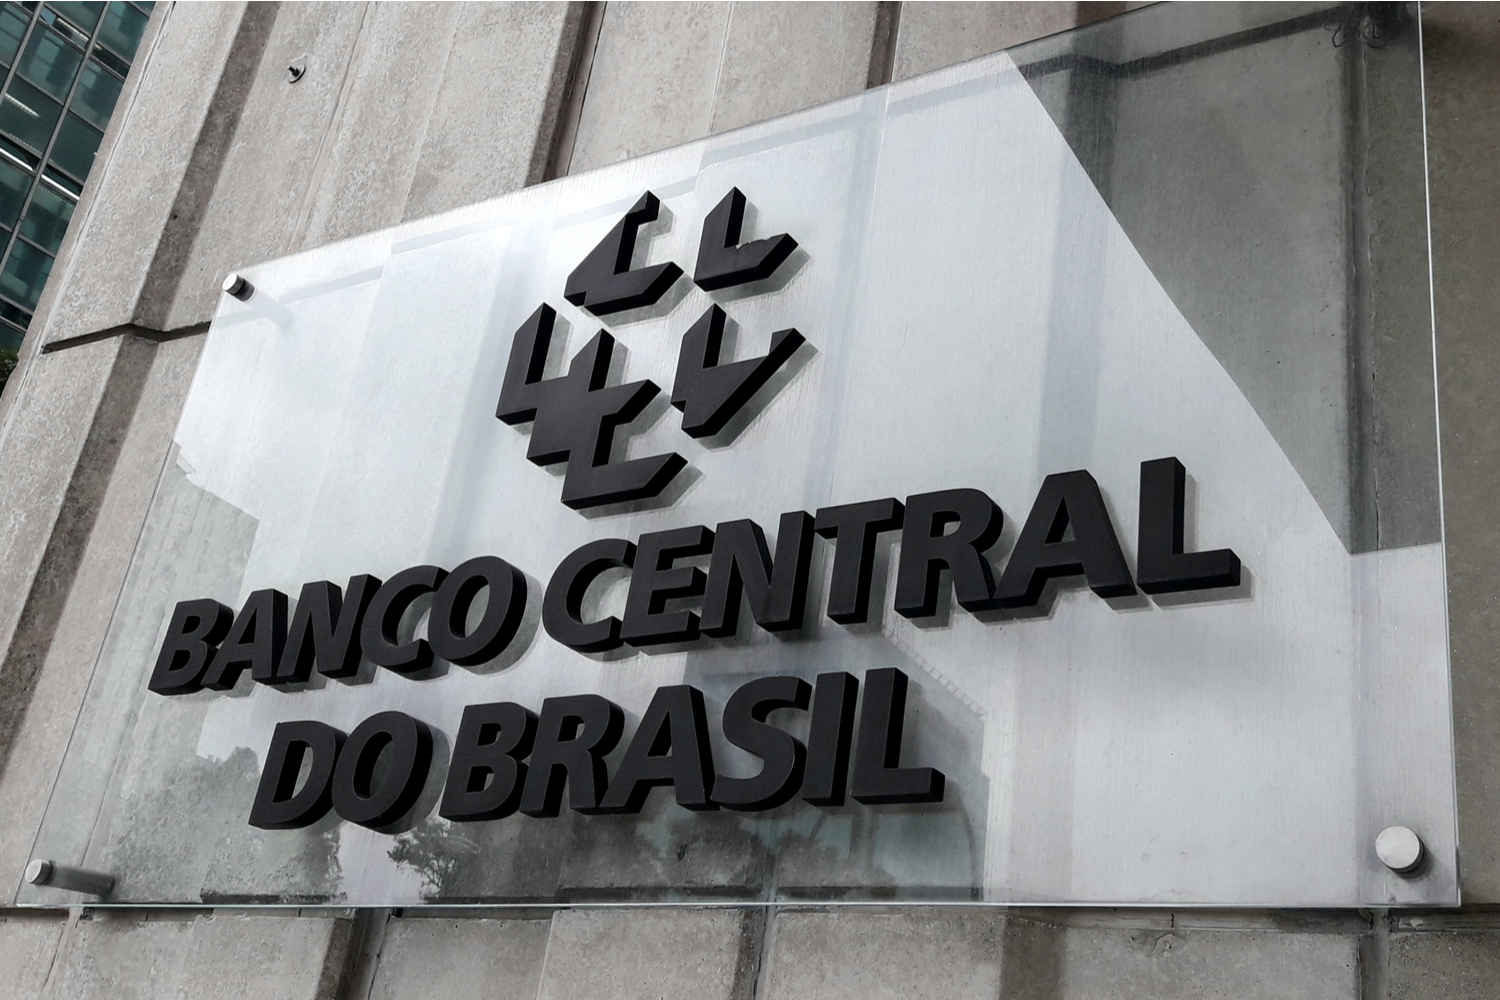 Brazil’s-central-bank-tasks-group-with-laying-out-road-map-to-digital-currency-issuance